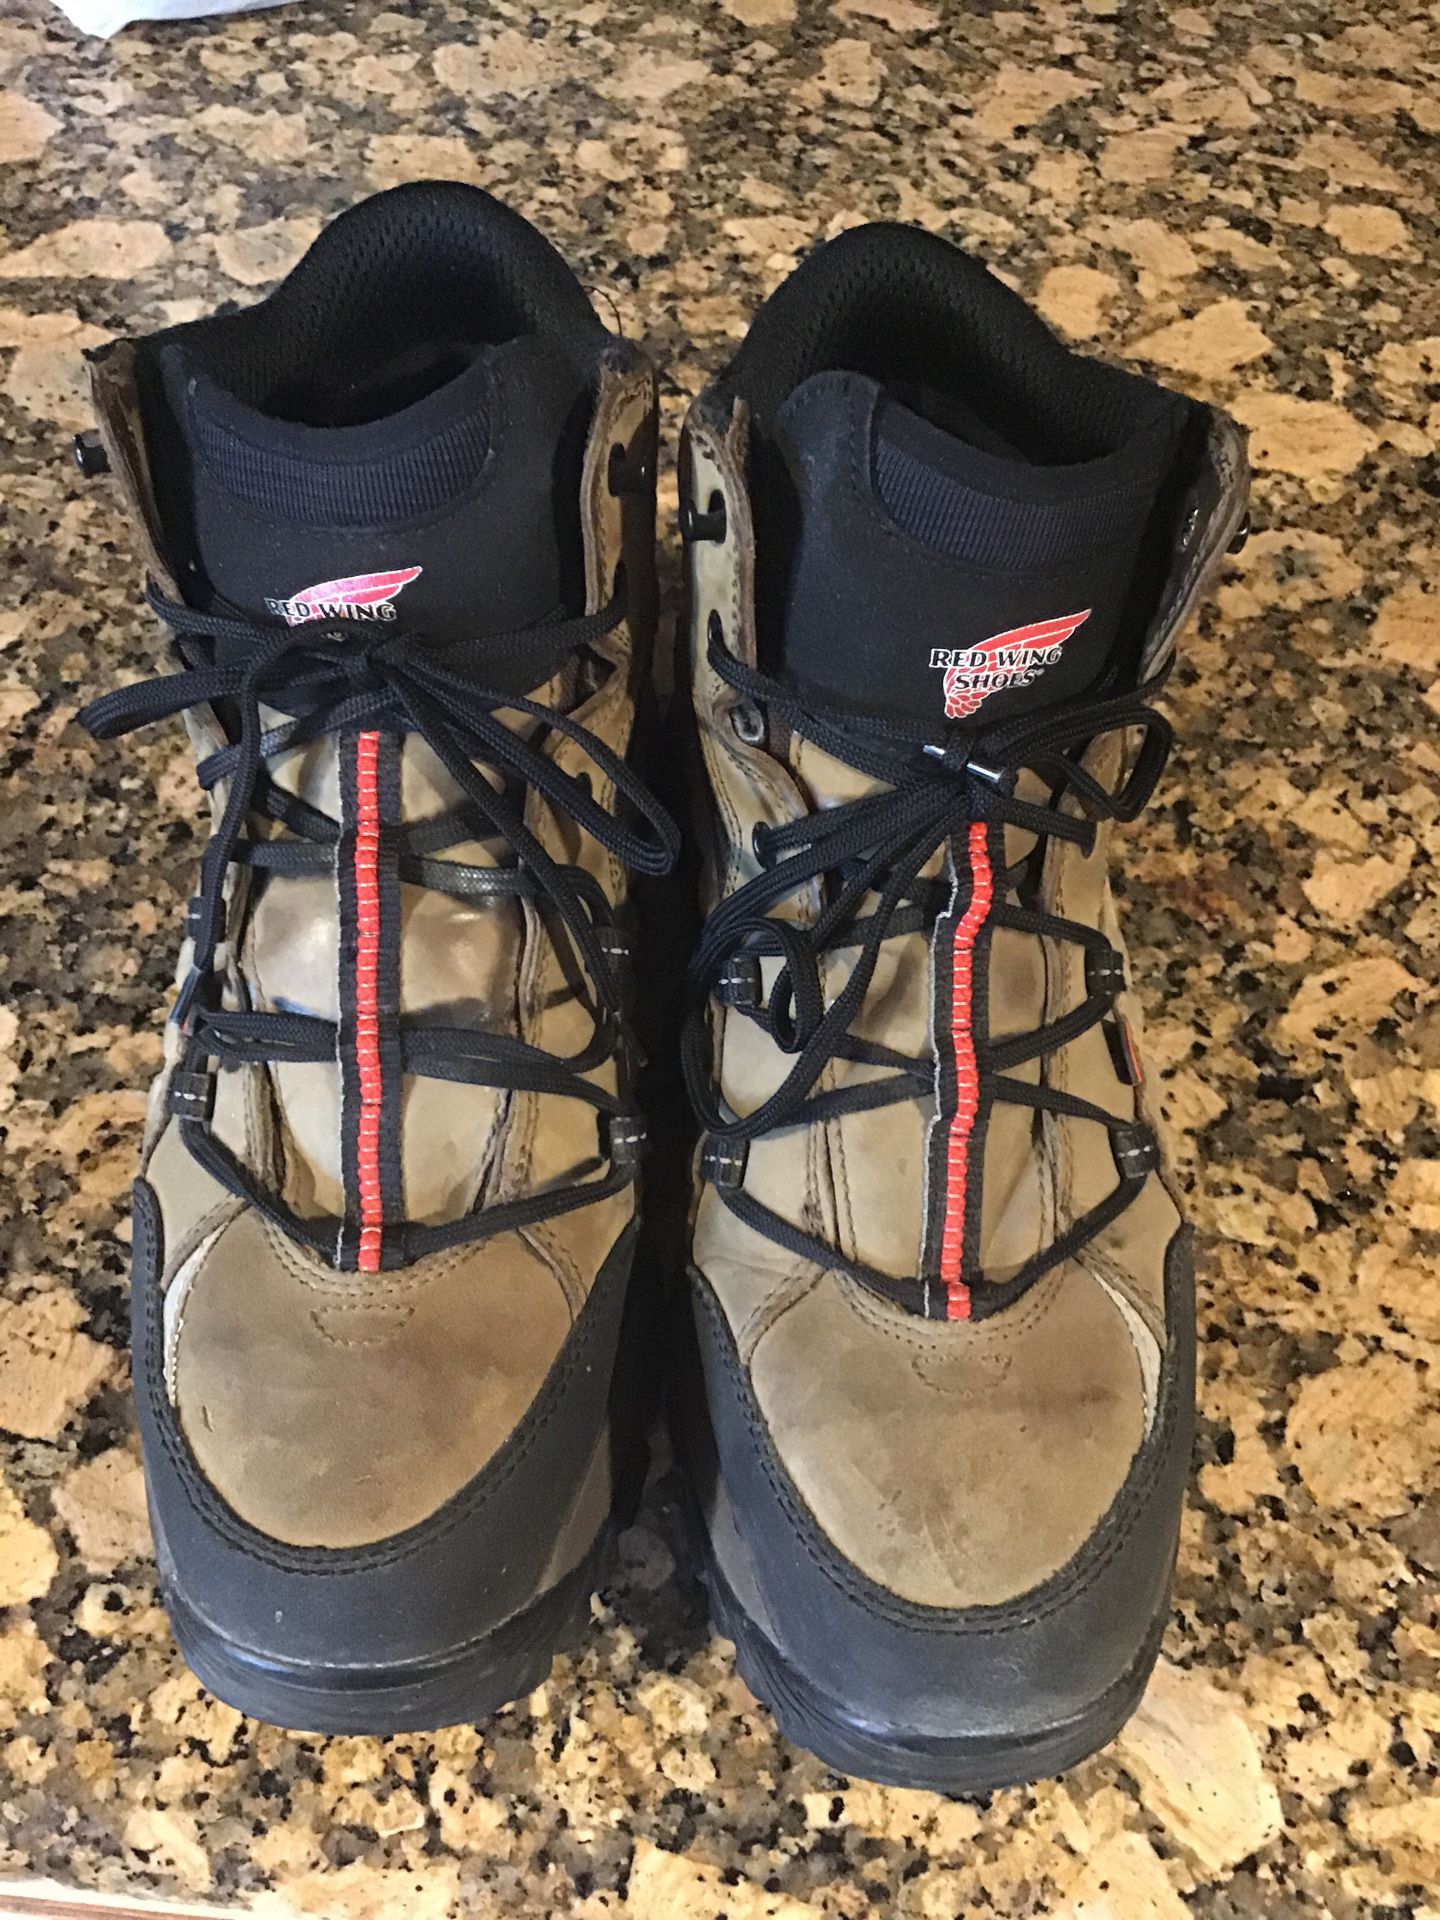 Red wings work boots waterproof steel toe very good condition size 10.5